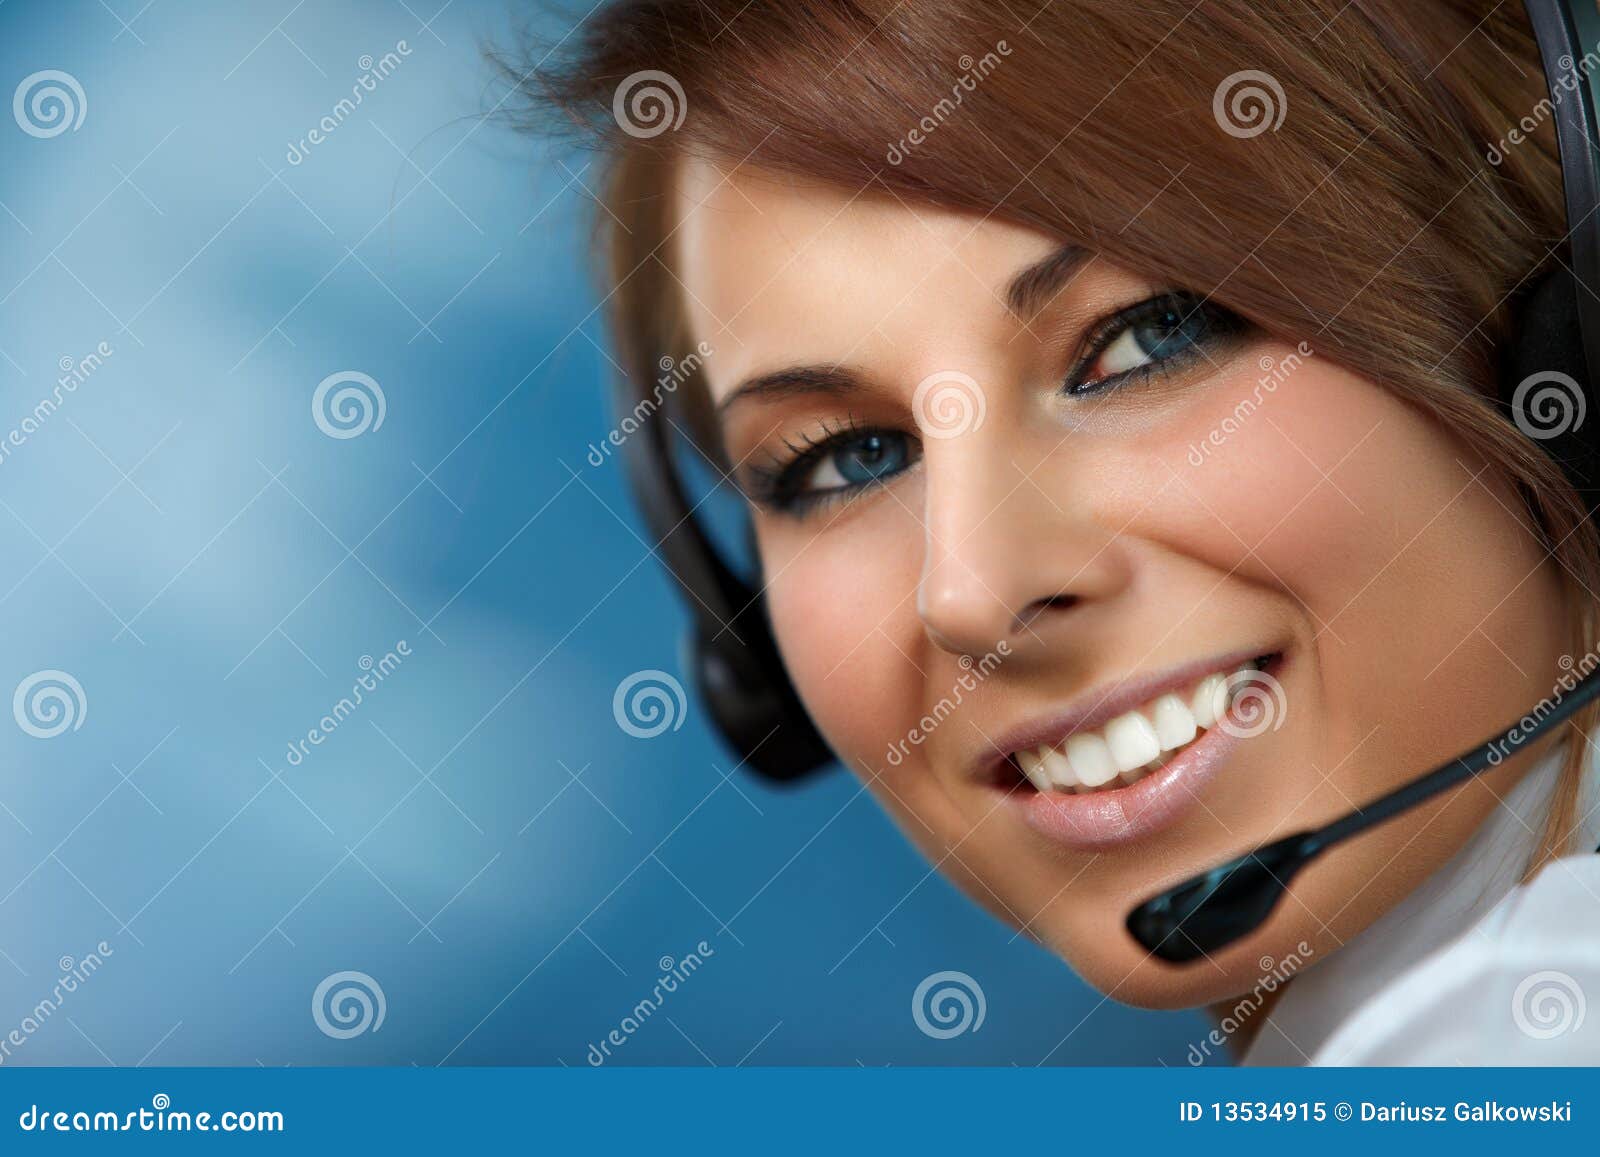 representative call center woman with headset.